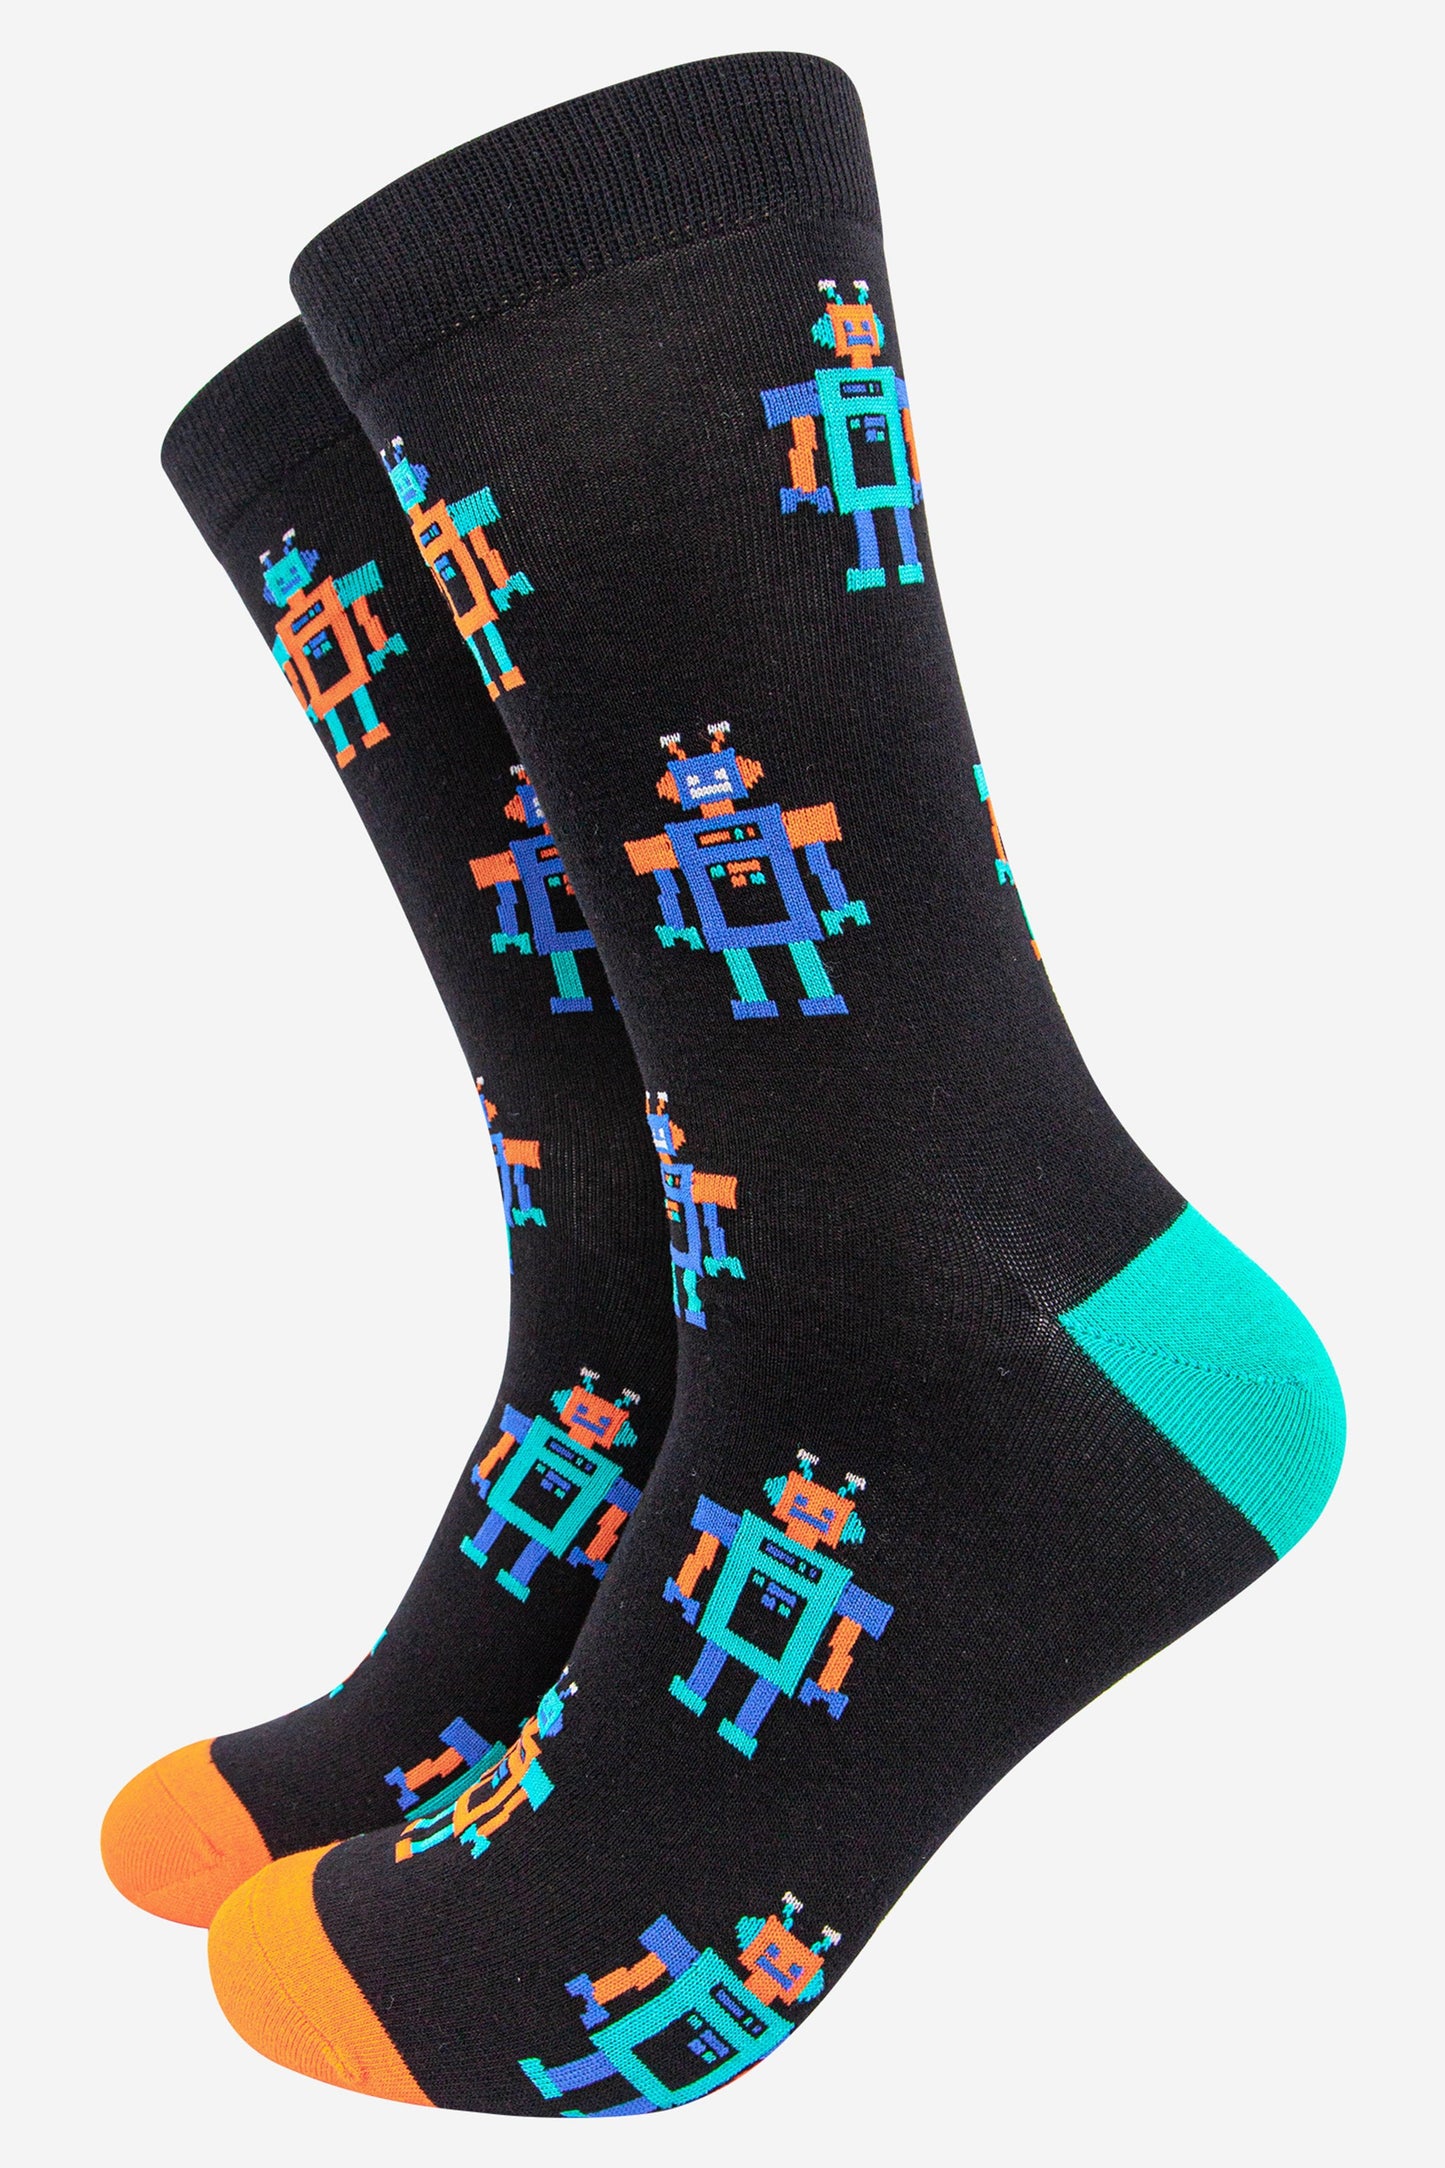 black socks with an all over pattern featuring blue and orange vintage robots with a blue heel and orange toe